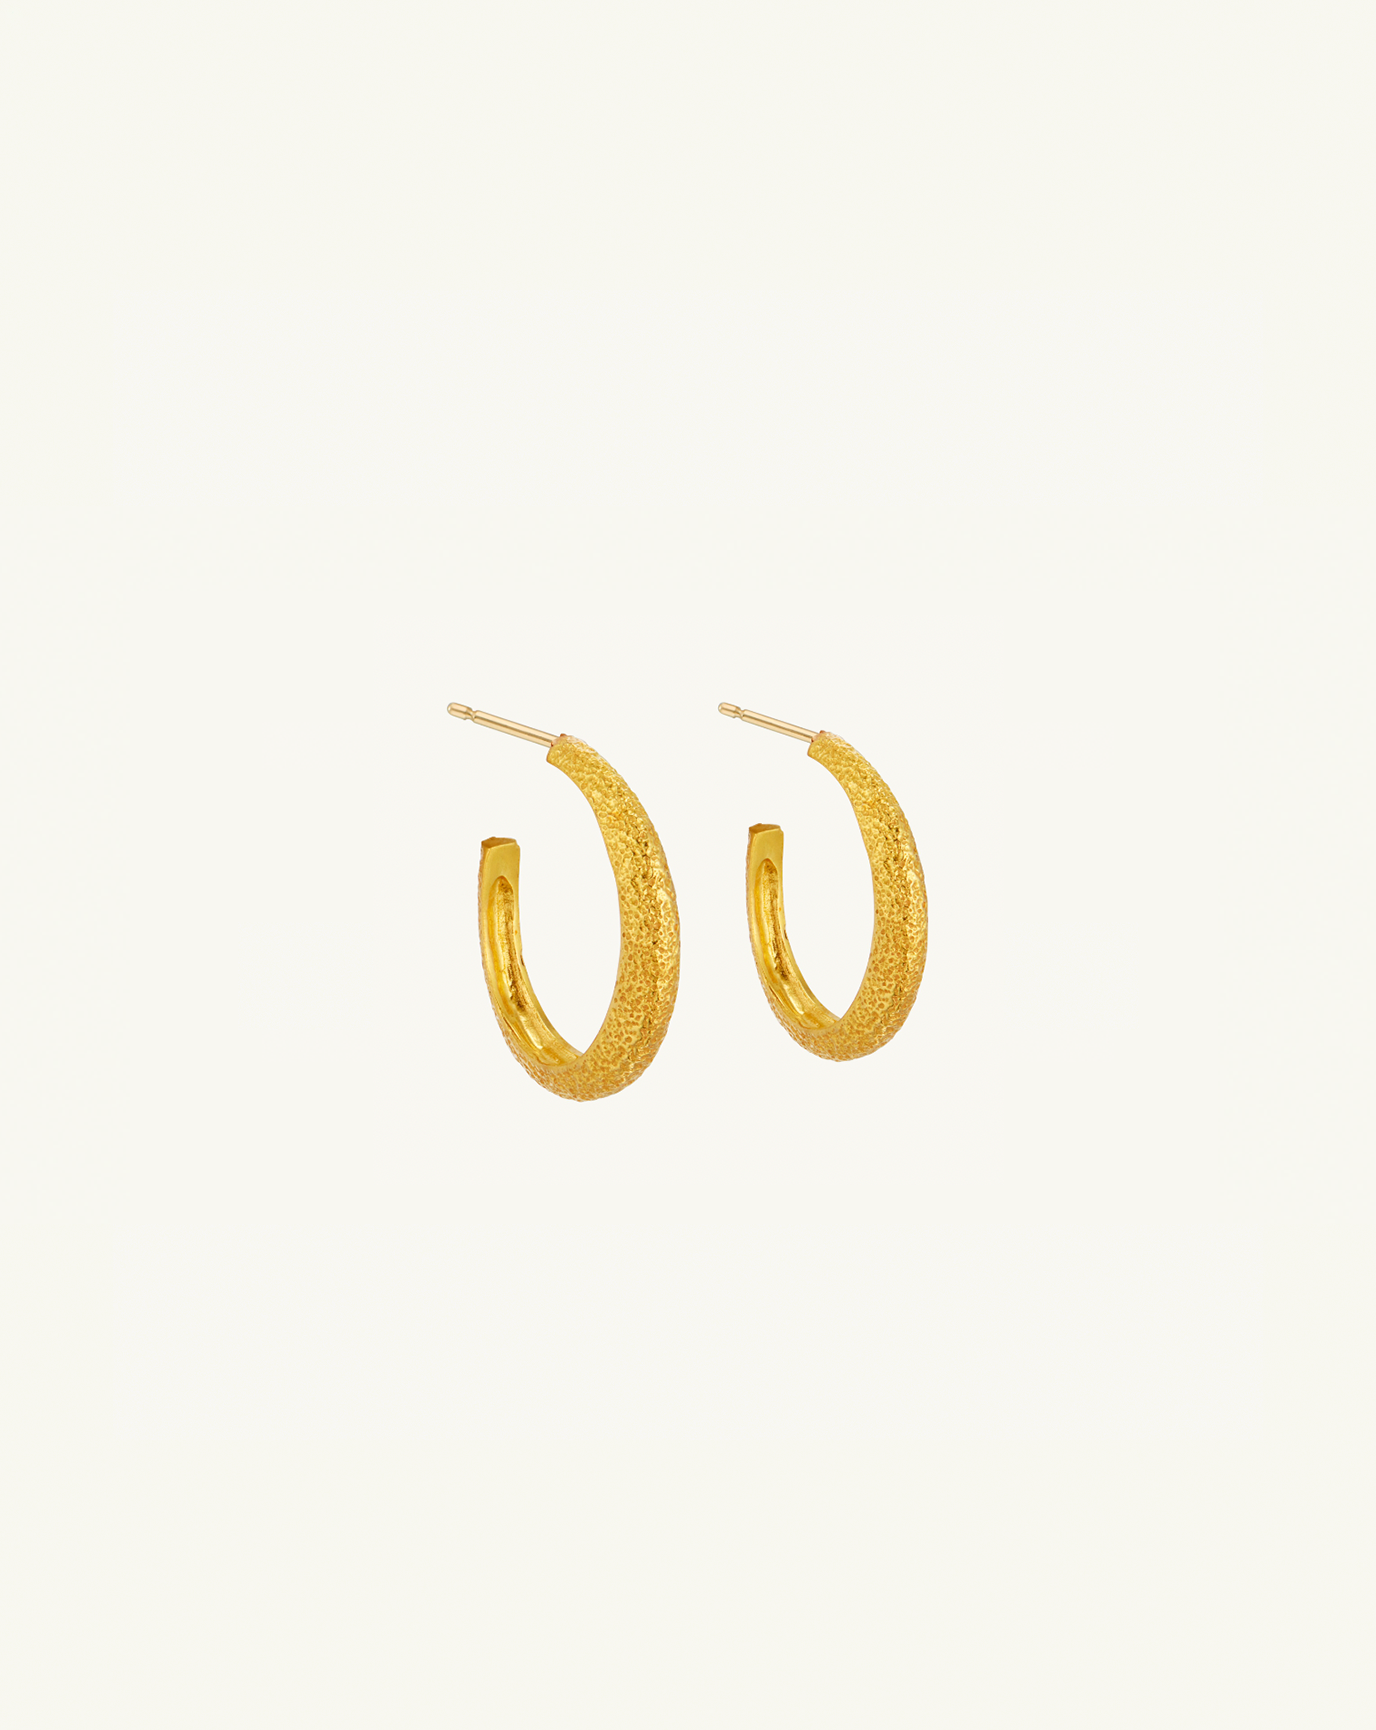 Product image of the medium sized asymmetric hoops with textured gold